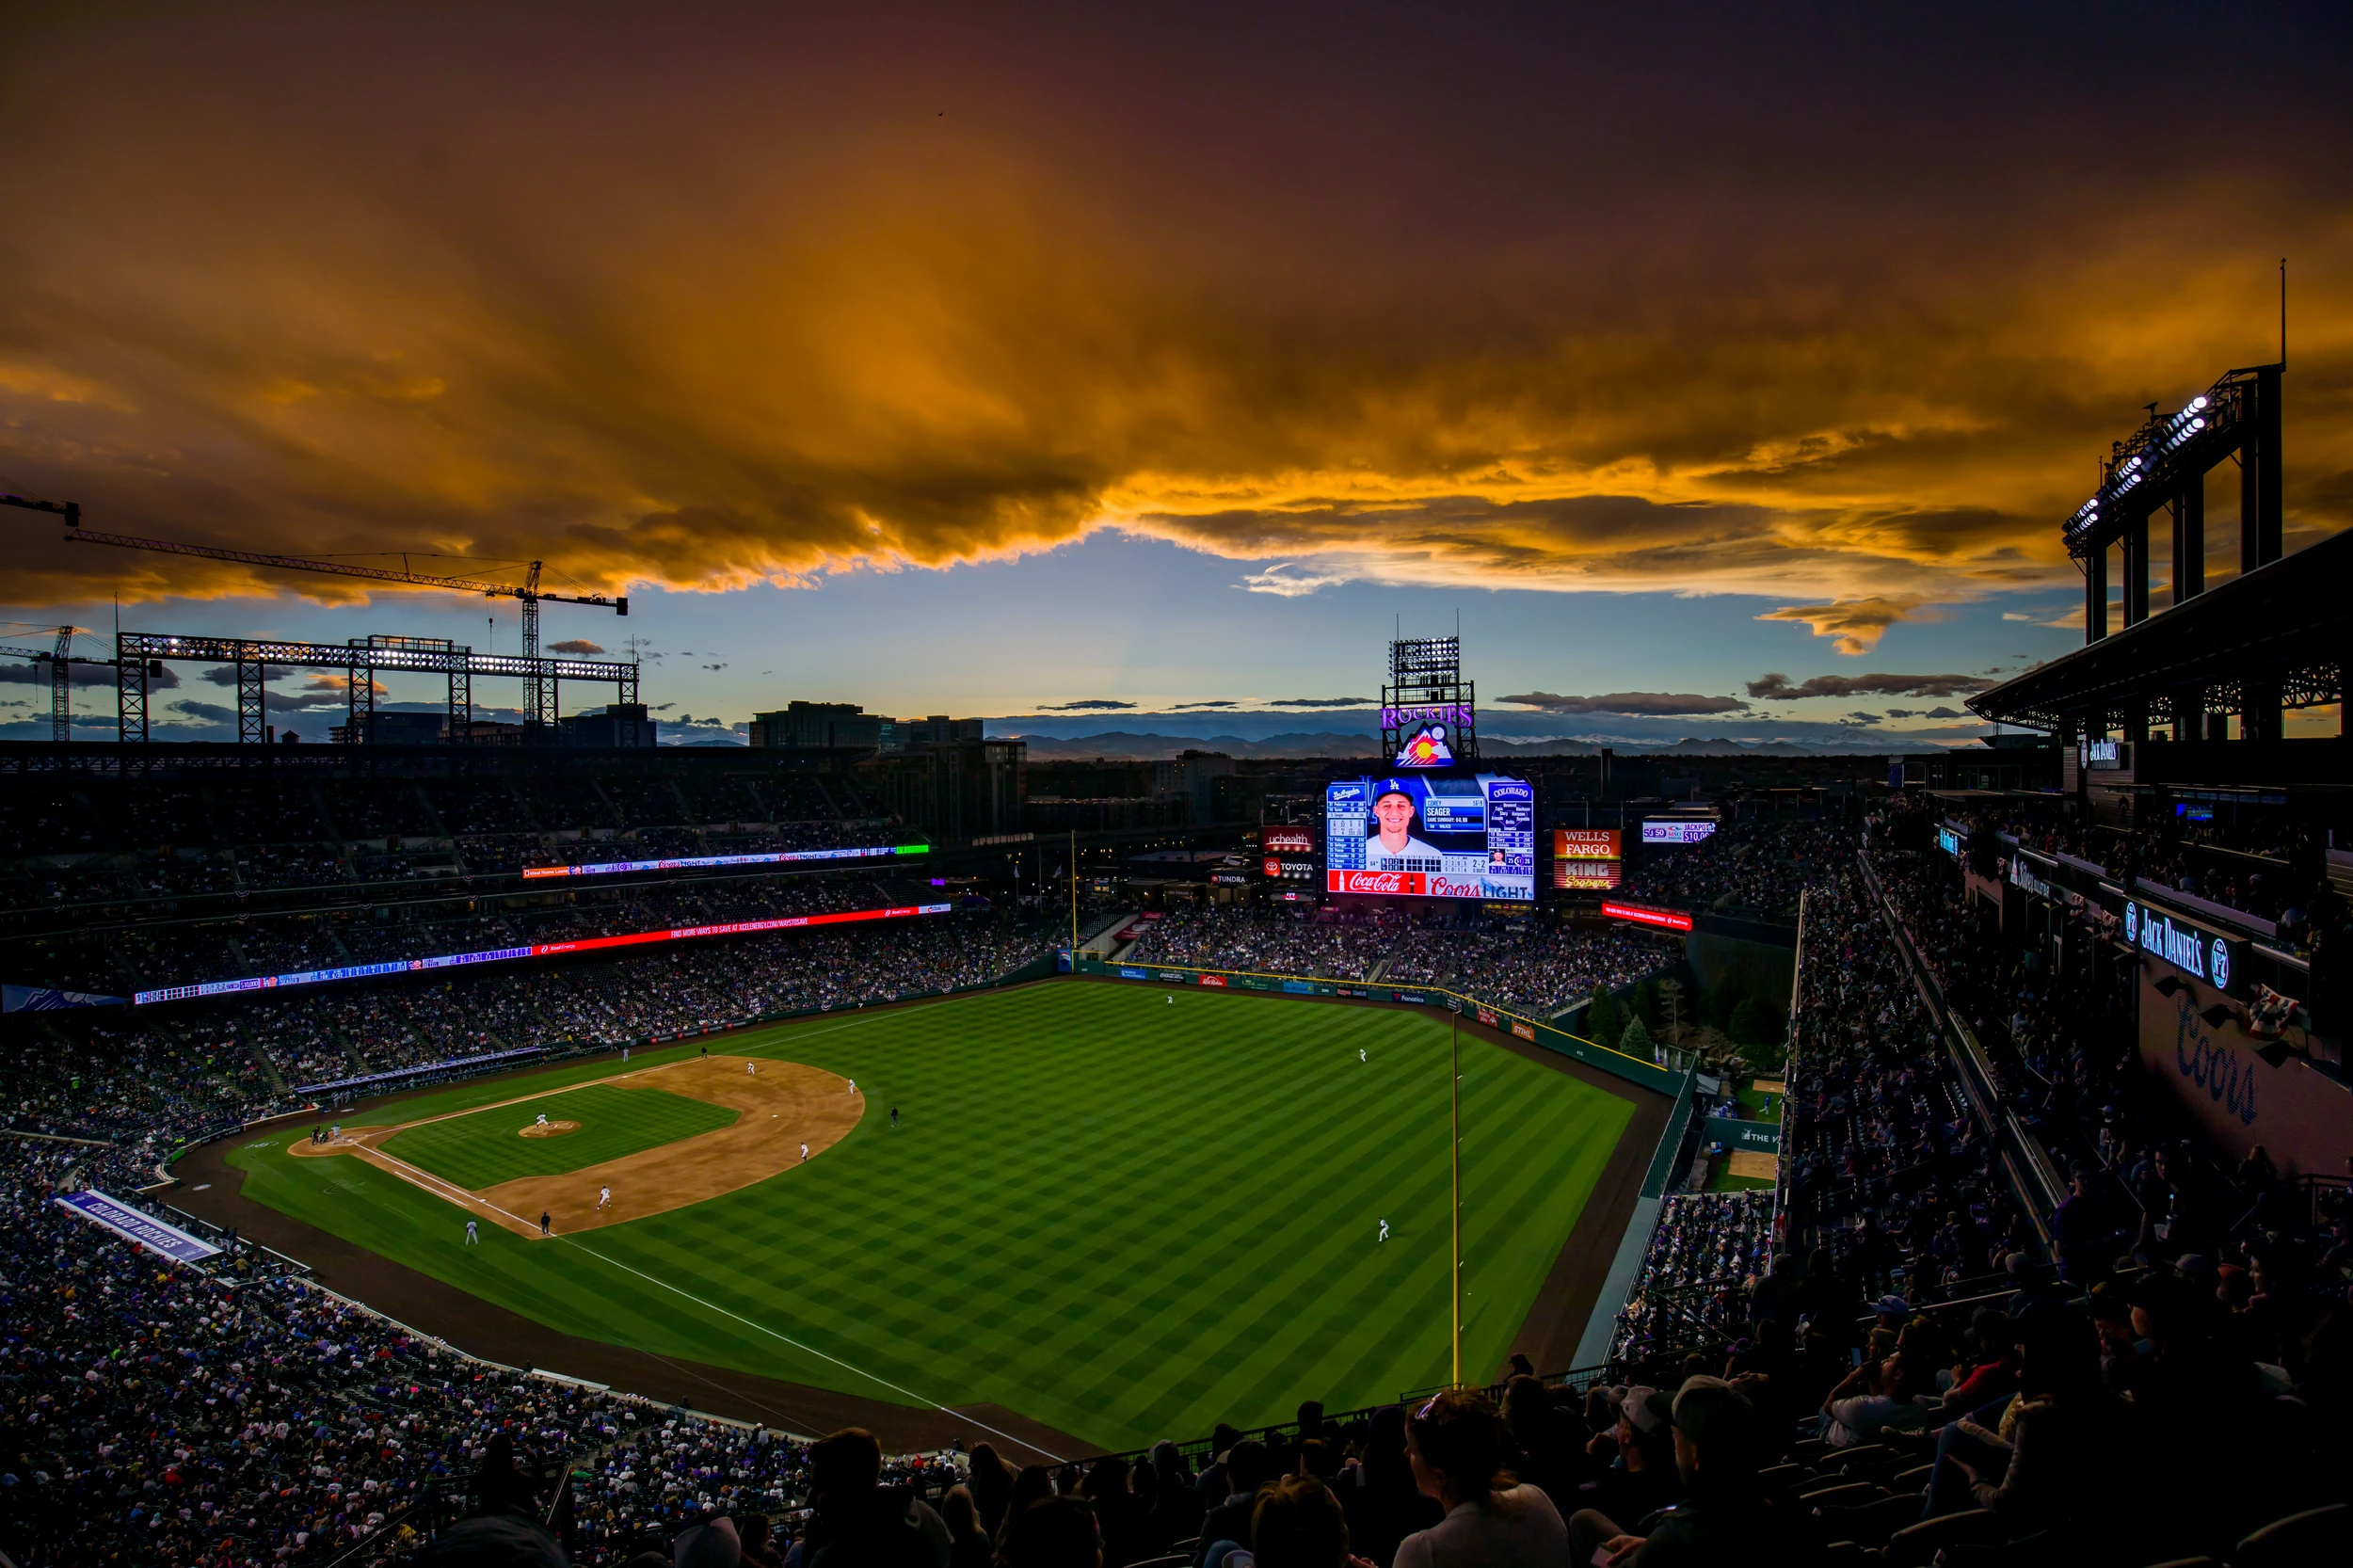 AP source: MLB moving All-Star Game to Denver's Coors Field